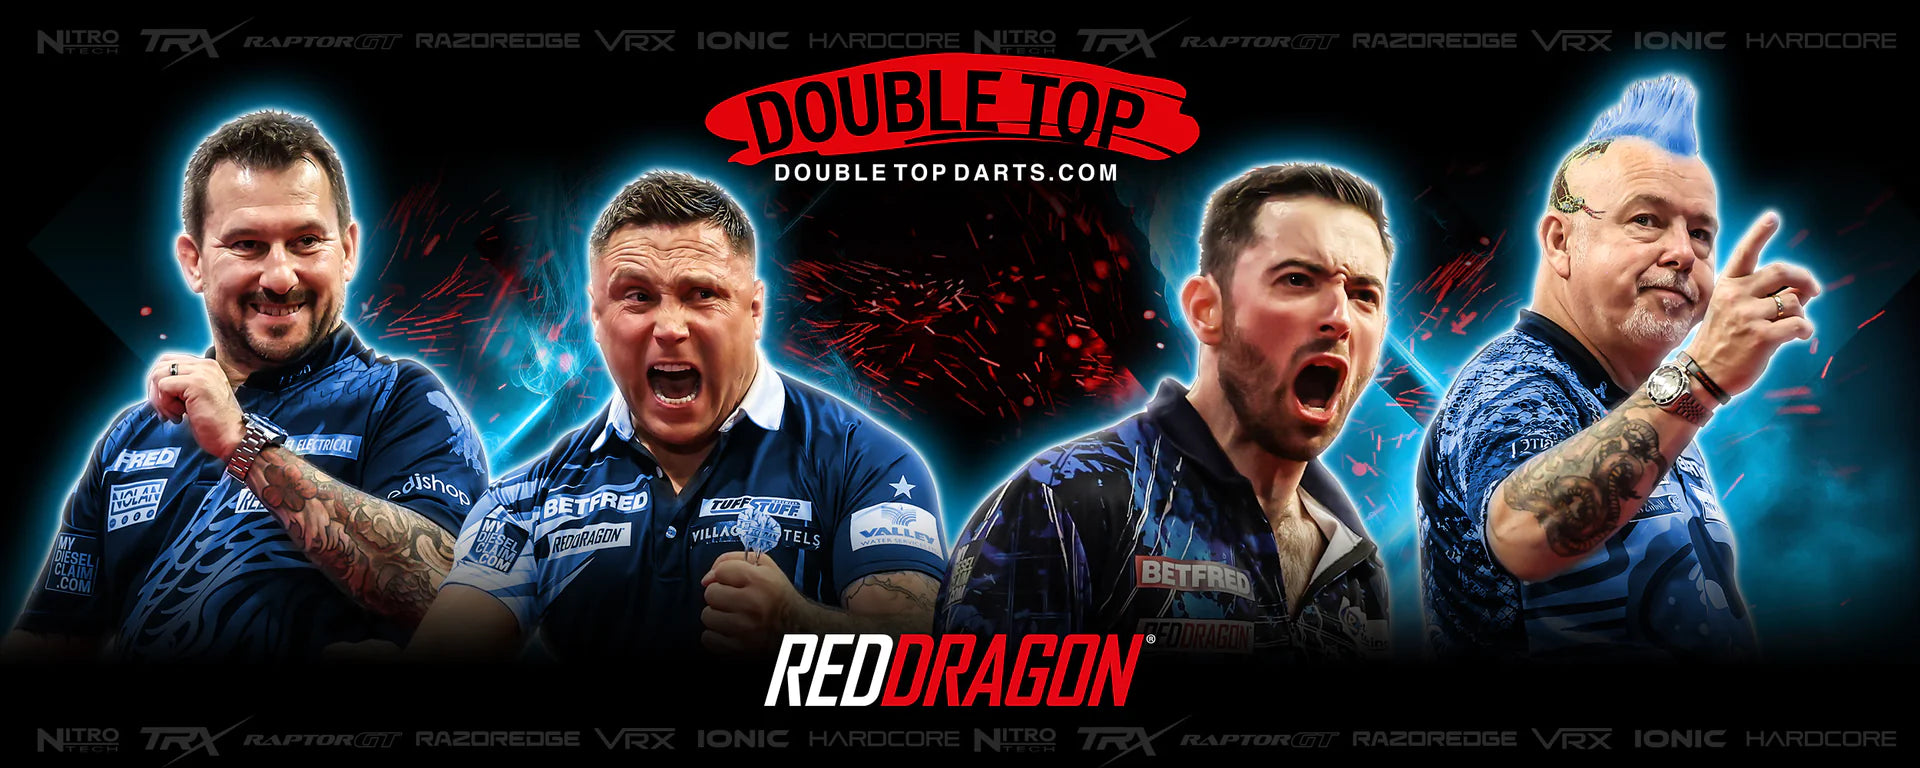 Game on! Red Dragon Darts are now available at Double Top Darts